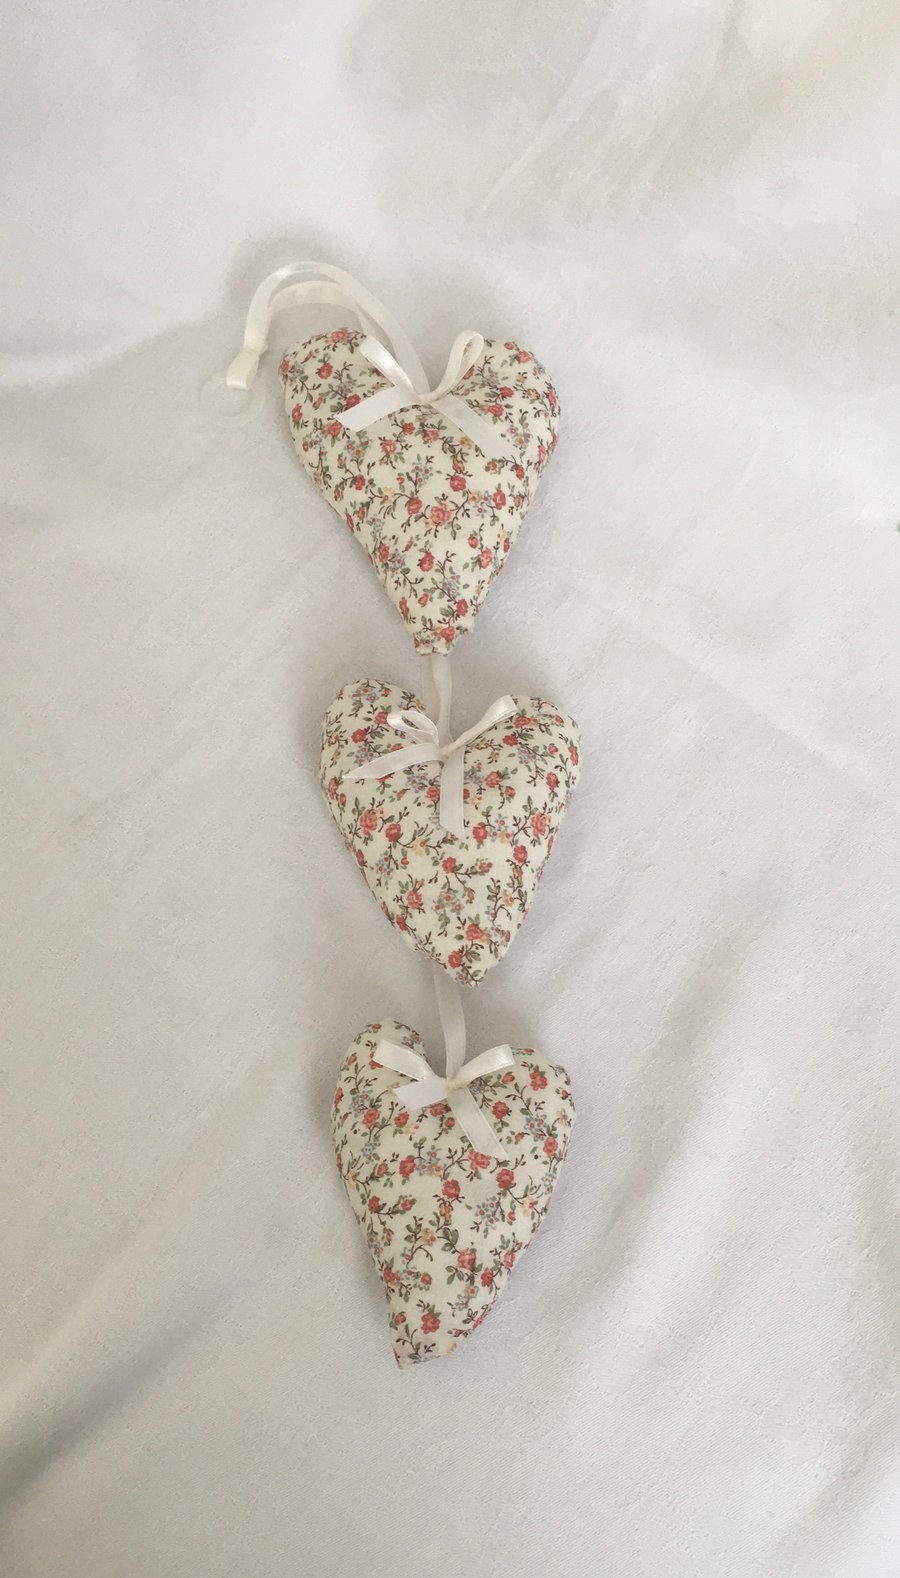 Pretty Roses Hanging Hearts, Cottage style Hearts, Home Decor, Gift Ideas.